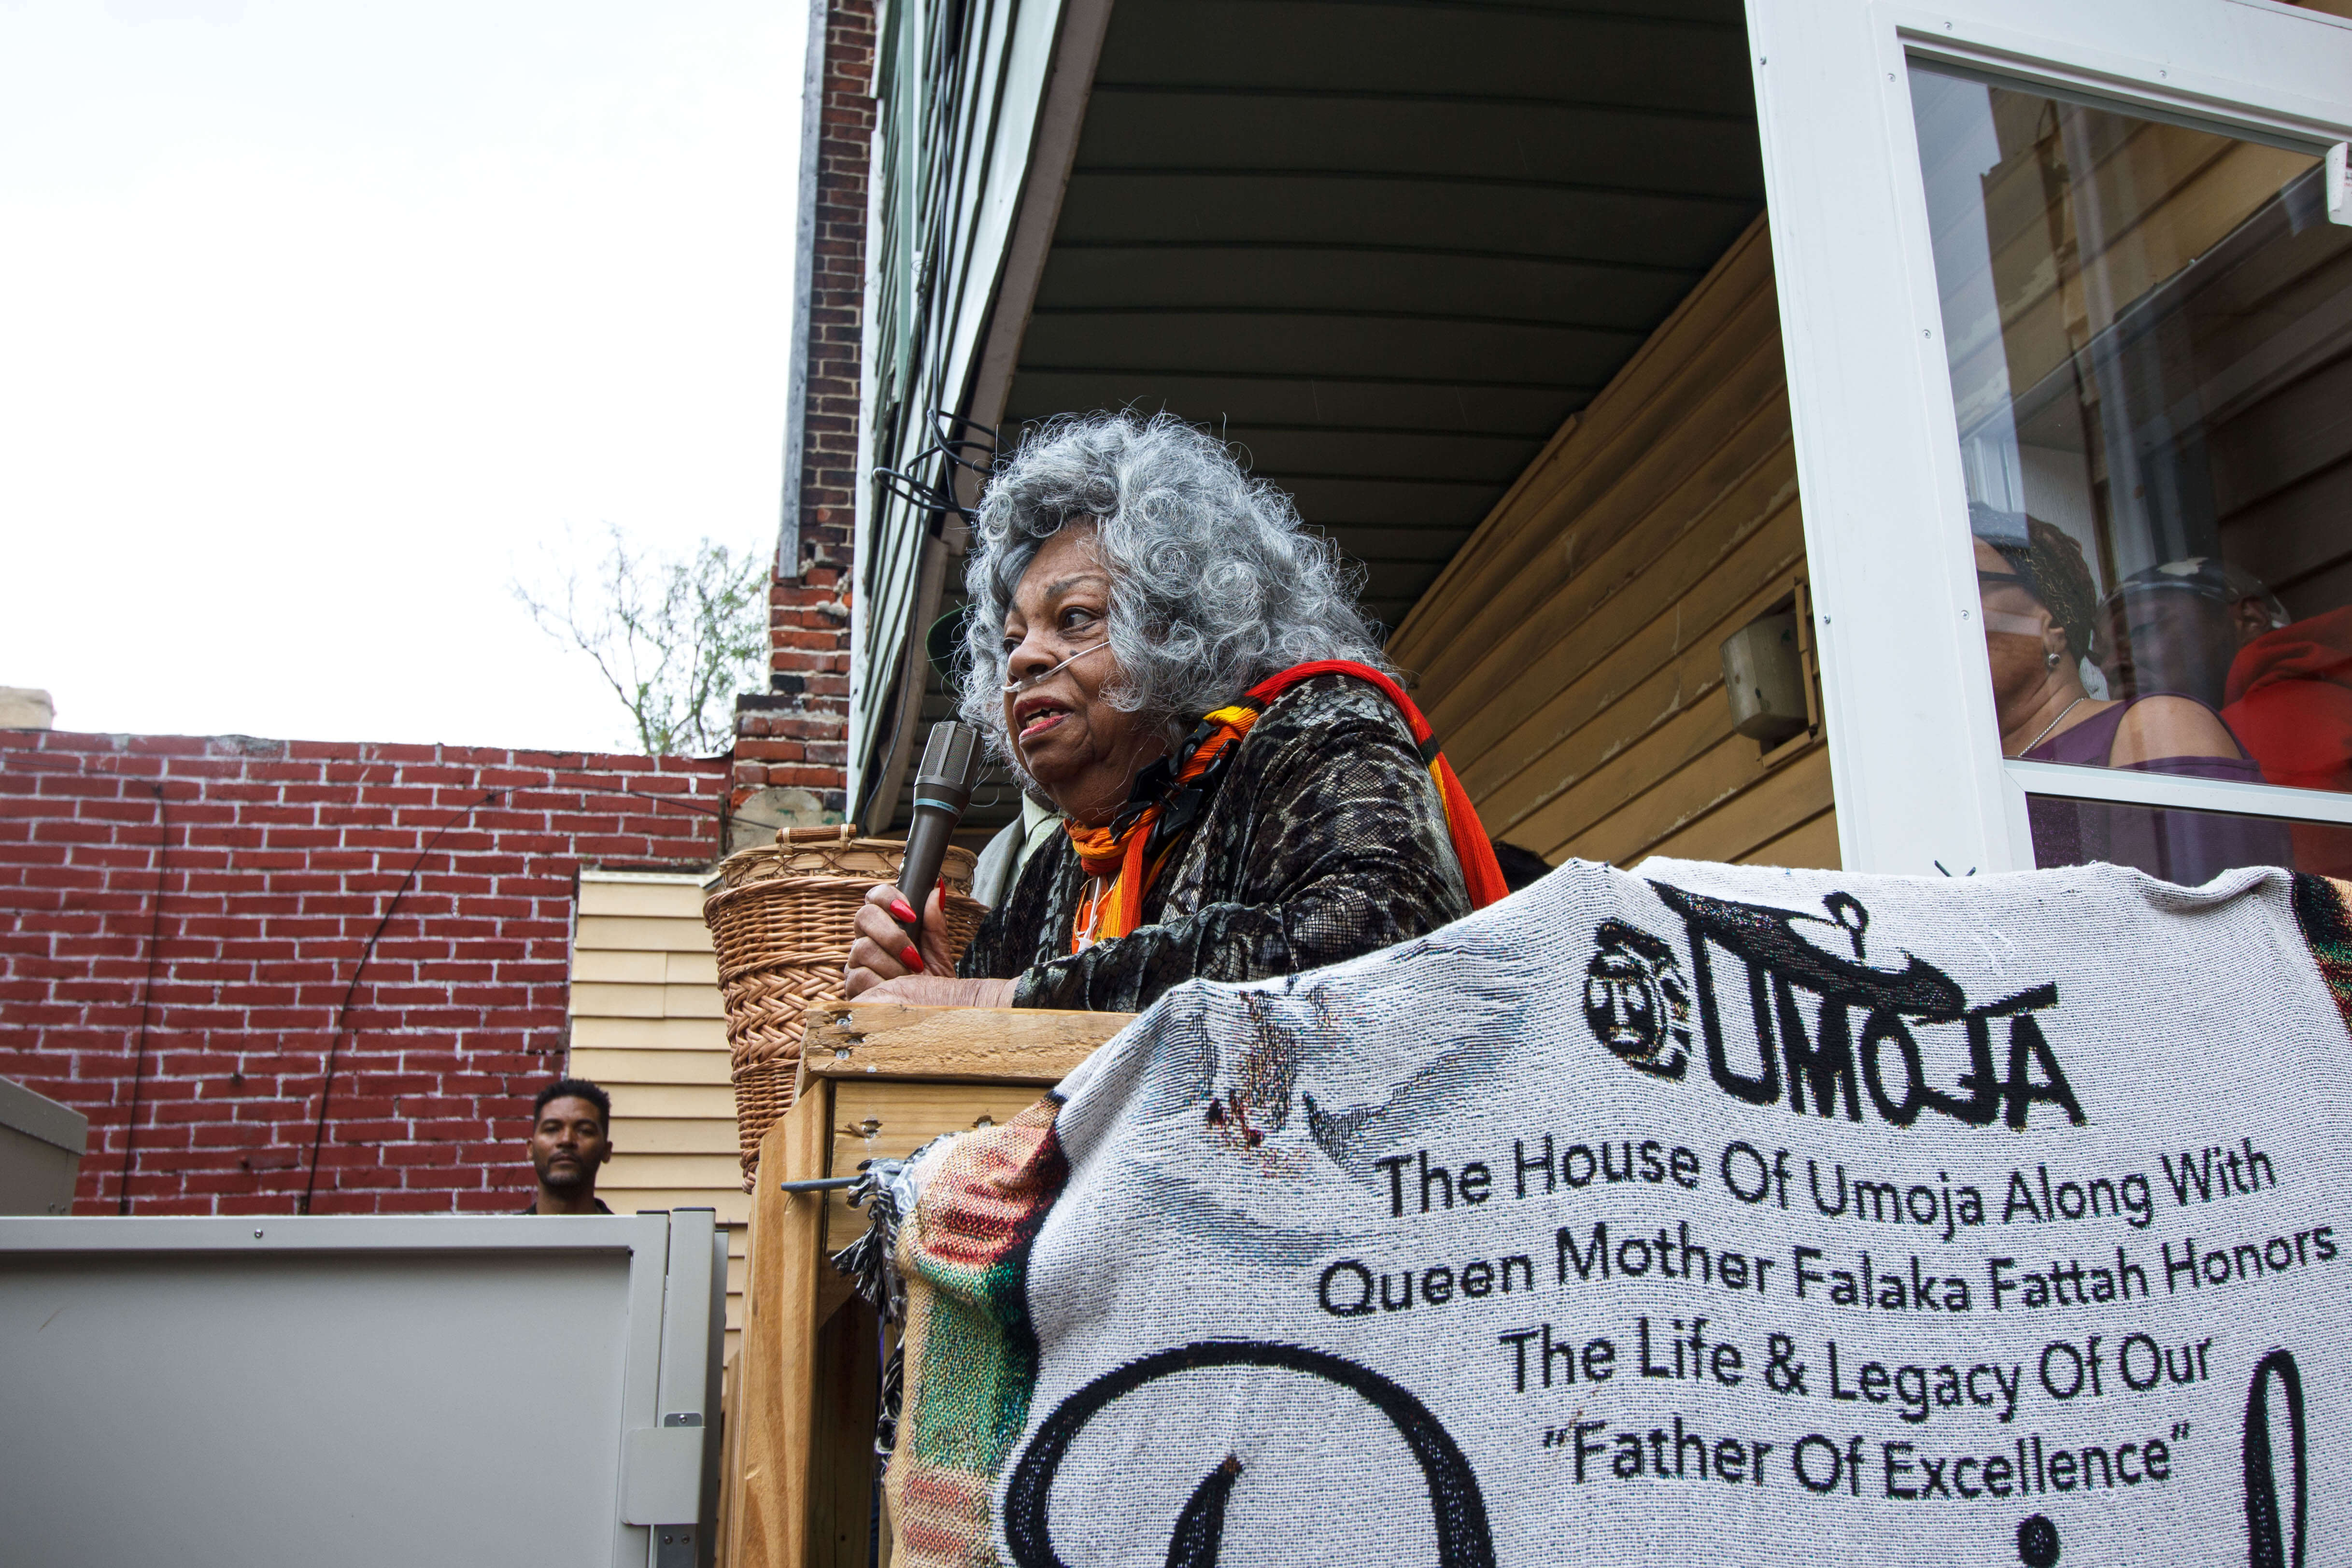 A woman with grey curly hair and a breathing tube connected to her nose is holding a microhpone. In the foreground hangs a grey fabric sign with black text that reads "The House of Umoja Along with Queen Mother Falaka Fattah Honors the Life & Legacy of Our "Father of Excellence"."